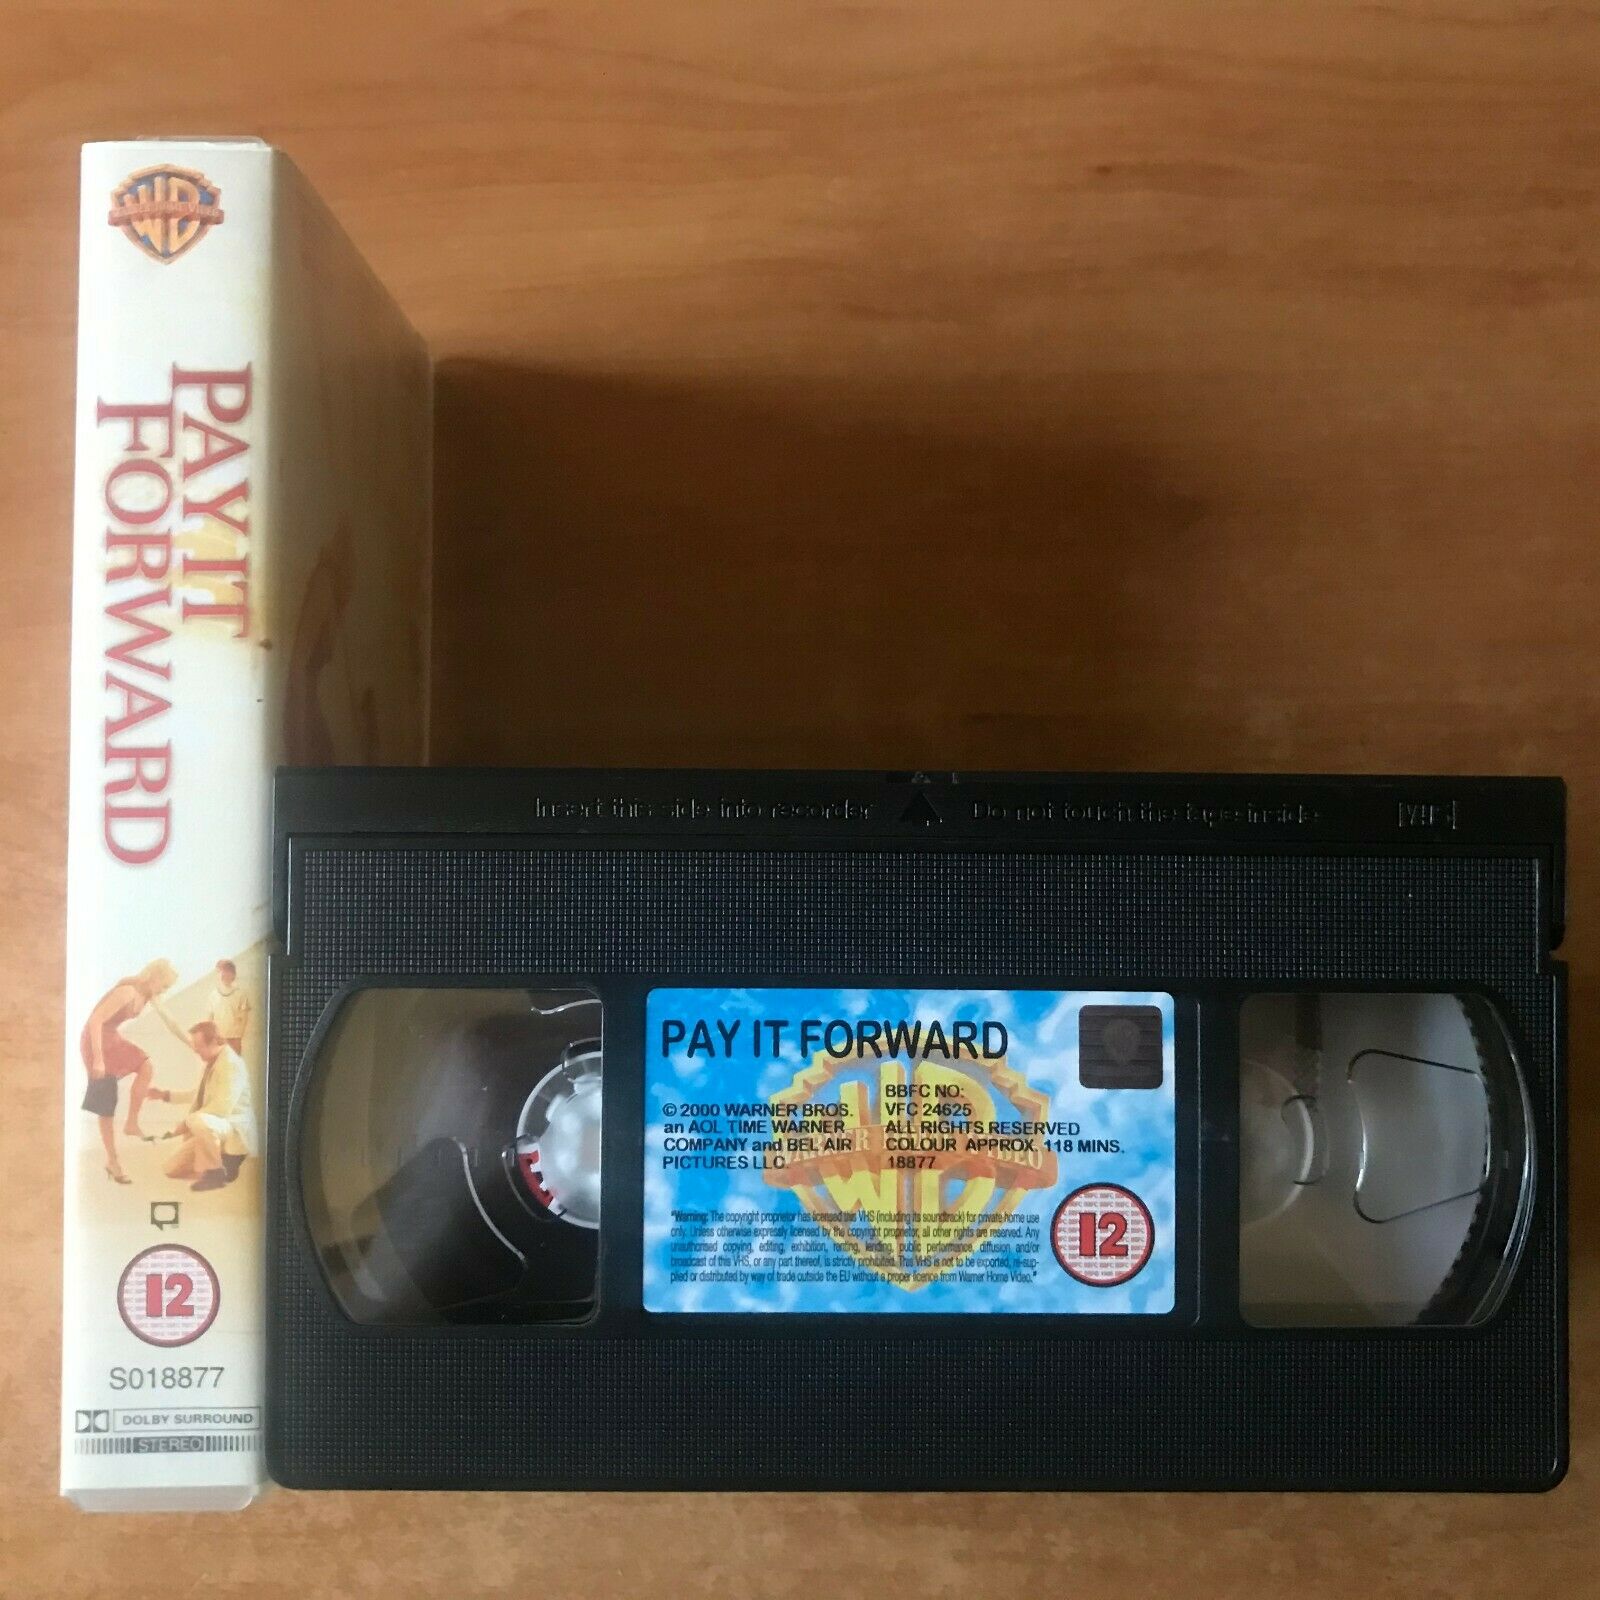 Pay It Forward (2000); [Catherine Ryan Hyde]: Drama - Kevin Spacey - Pal VHS-